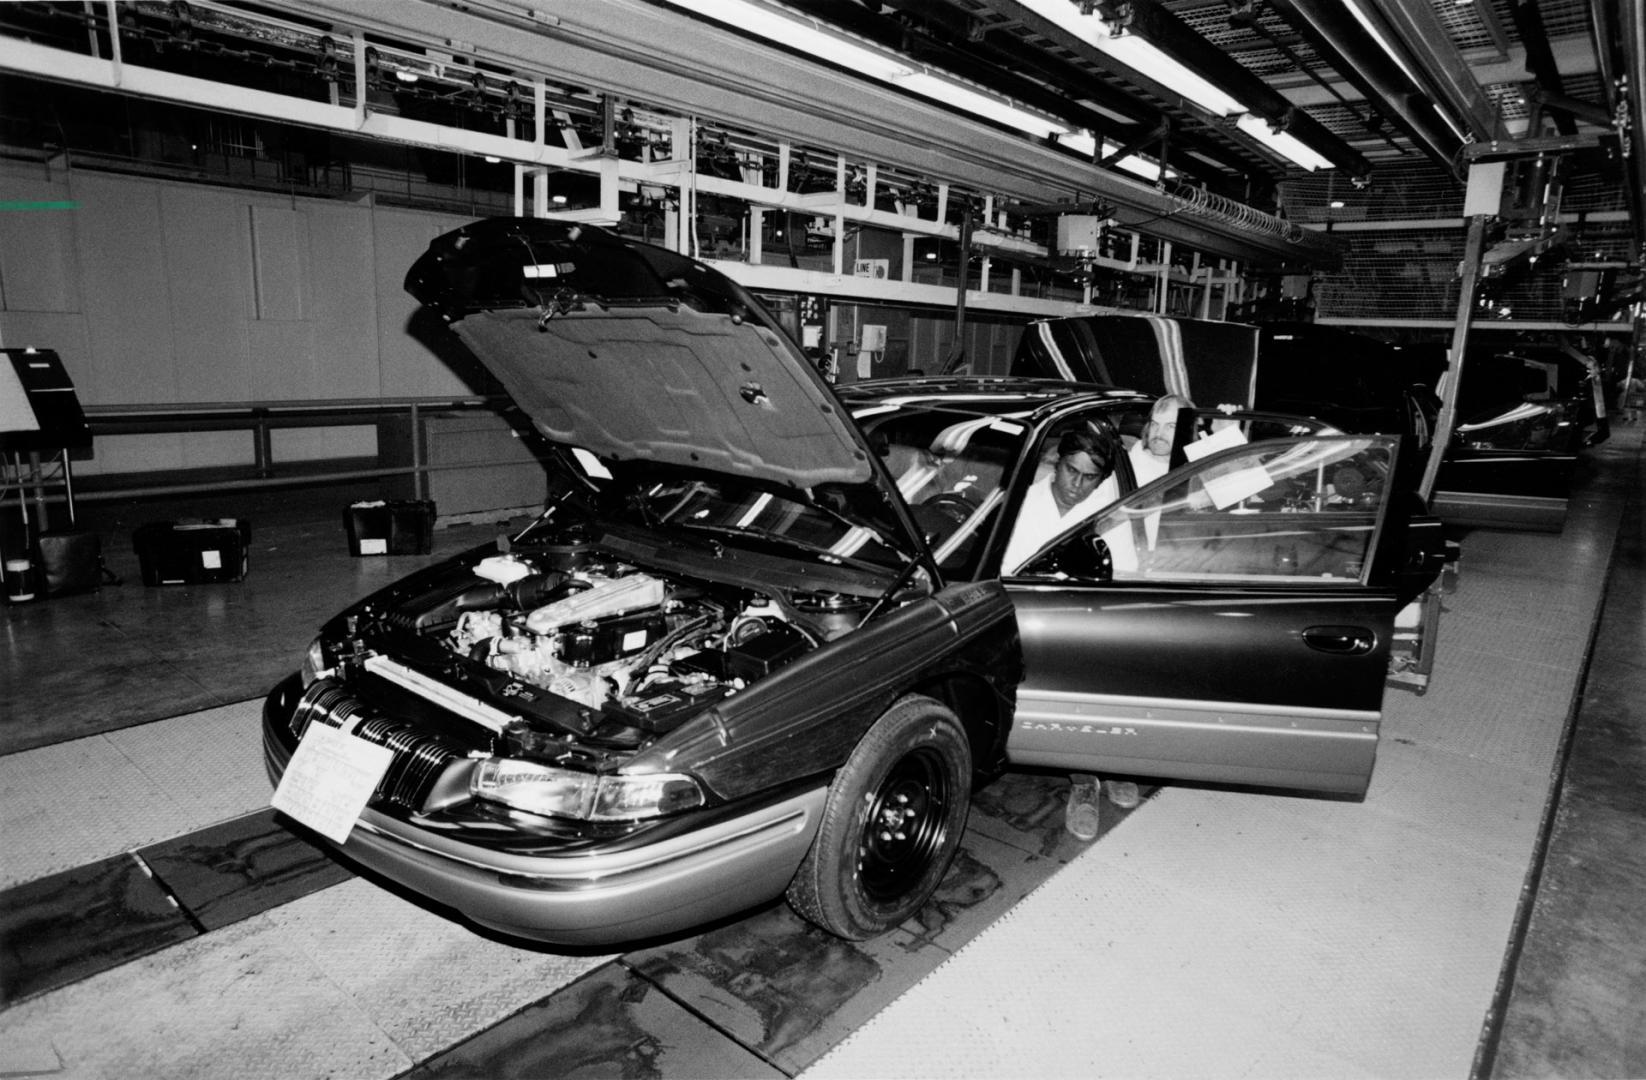 The Chrysler Intrepid at the end of the assembly line. Chrysler Plant, Bramalea, Ontario